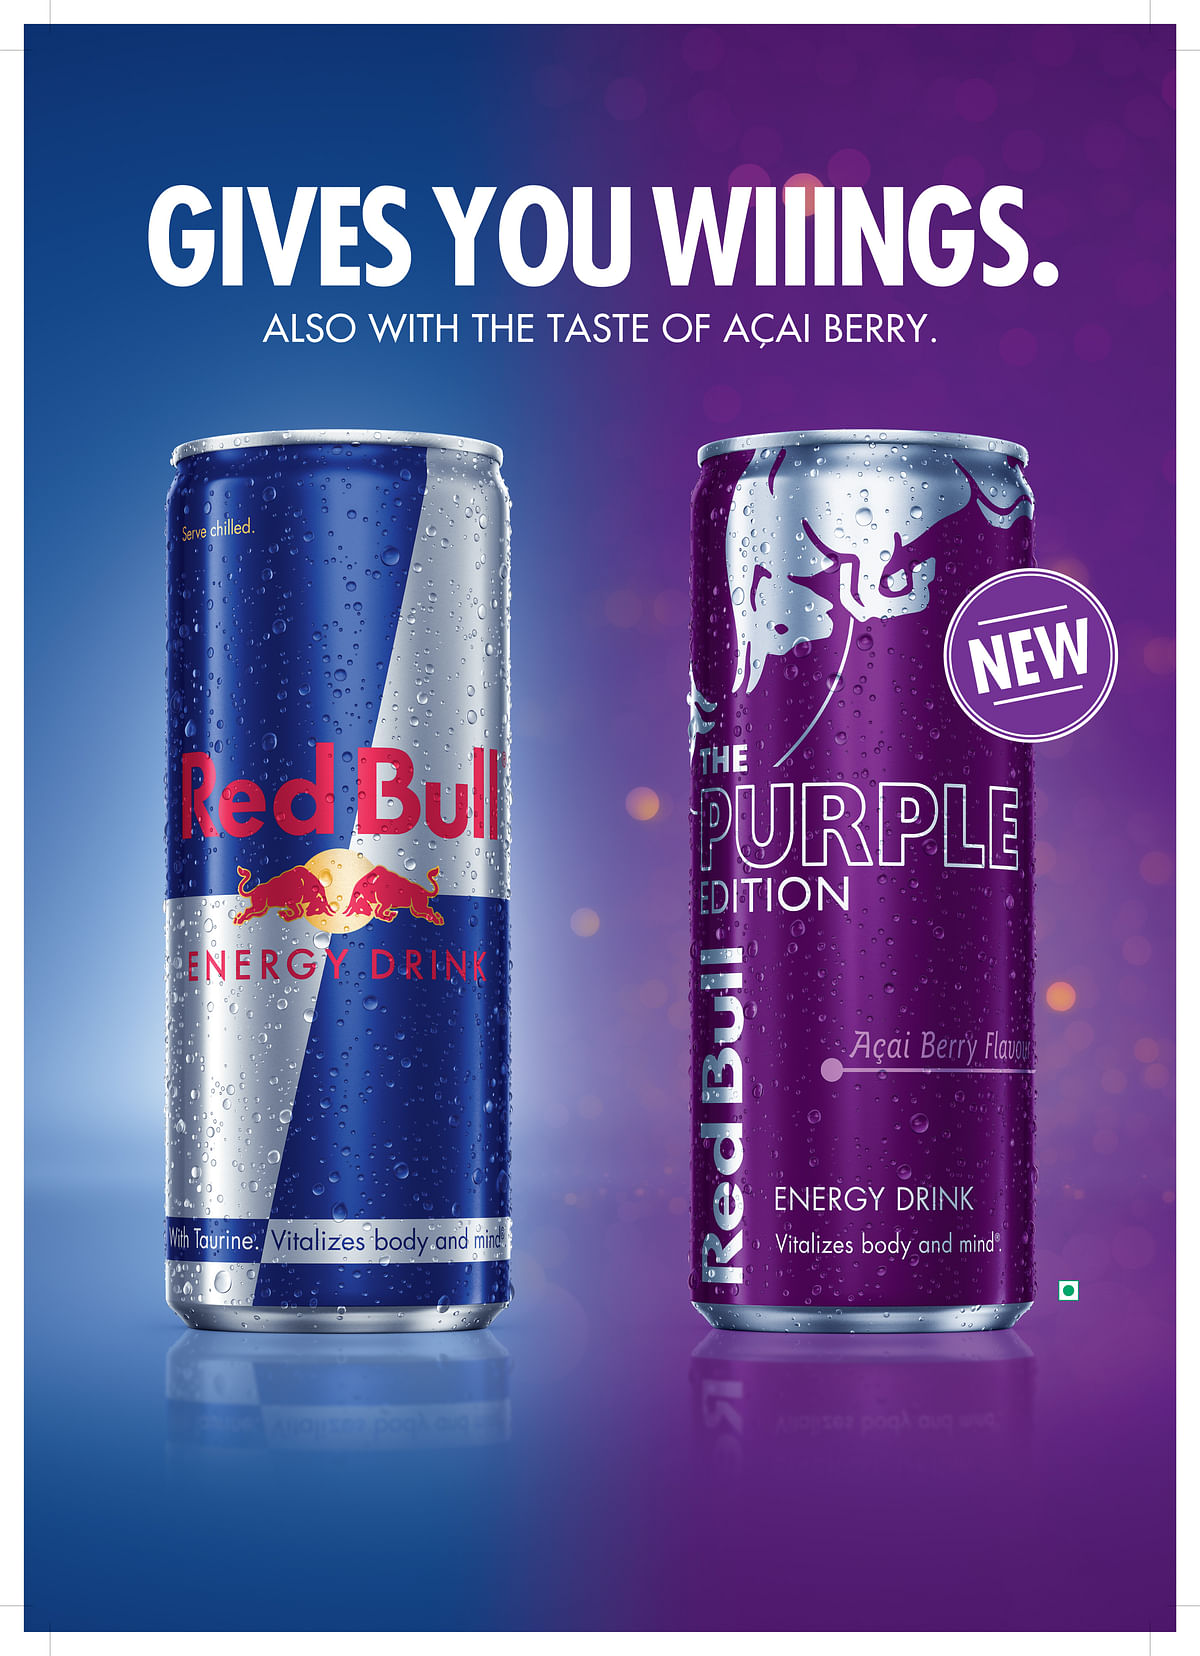 Red Bull diversifies flavour portfolio with Acai berry flavoured drink and new packaging